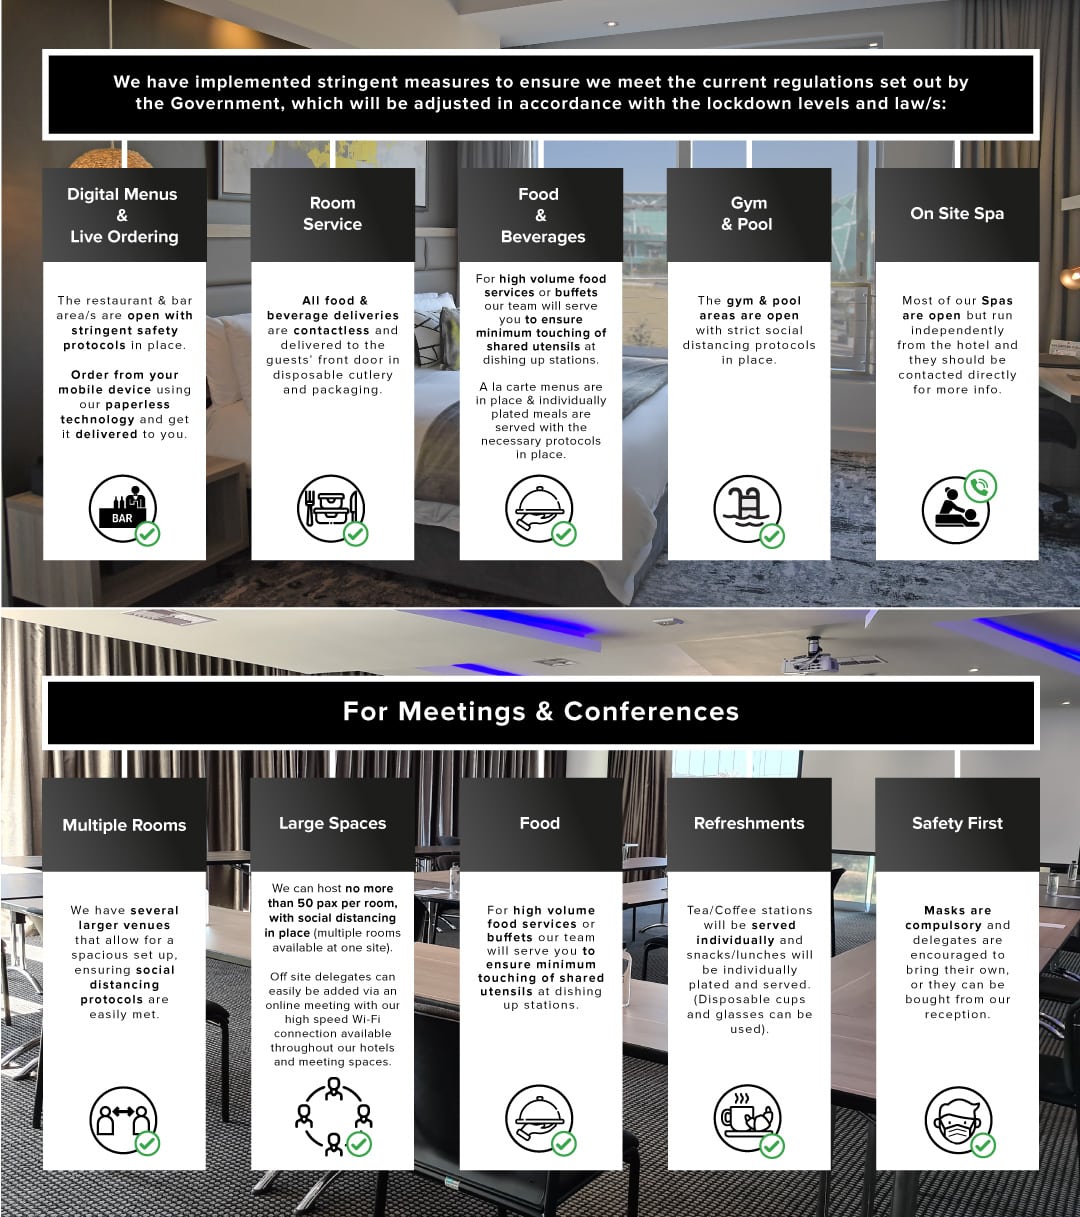 OUR POLICIES FOR COVID 19 Infographic Dec2020 v7 02 - The Capital Hotels & Apartments 4